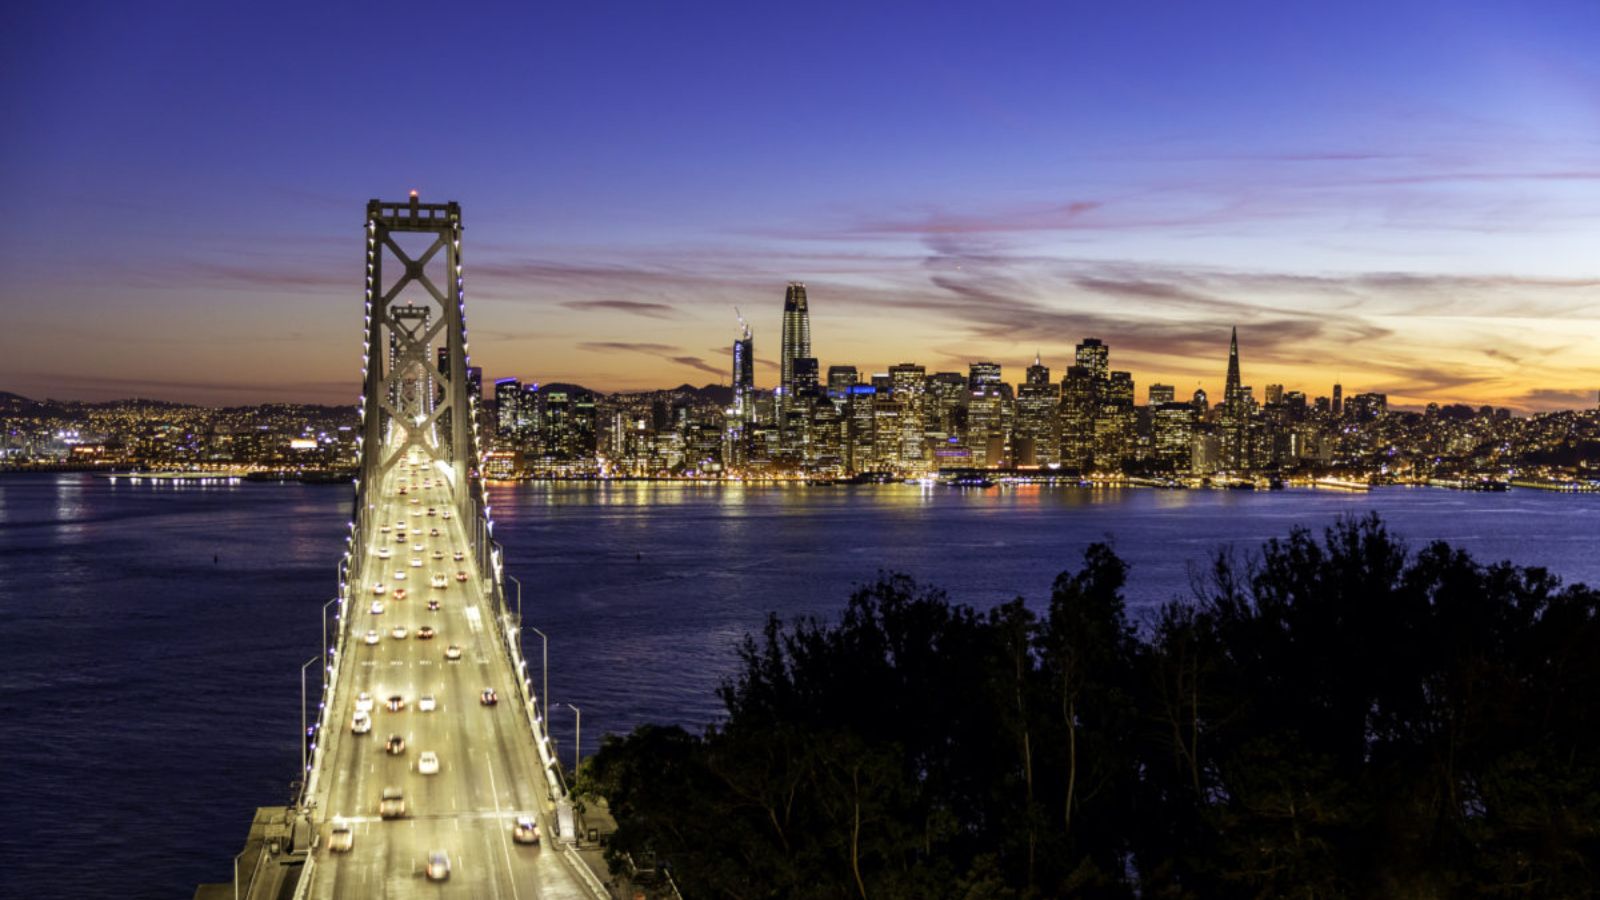 <p>San Francisco, another Californian city on the list, has much to offer for a weekend escape, including <a href="https://ashandpri.com/worst-us-states" rel="noopener">sightseeing and entertainment</a>. The crowds may be annoying, though. A visit to one of the popular tourist destinations, such as Alcatraz, might occupy your waiting time. In many of the city’s attractions, waiting is the norm.</p>